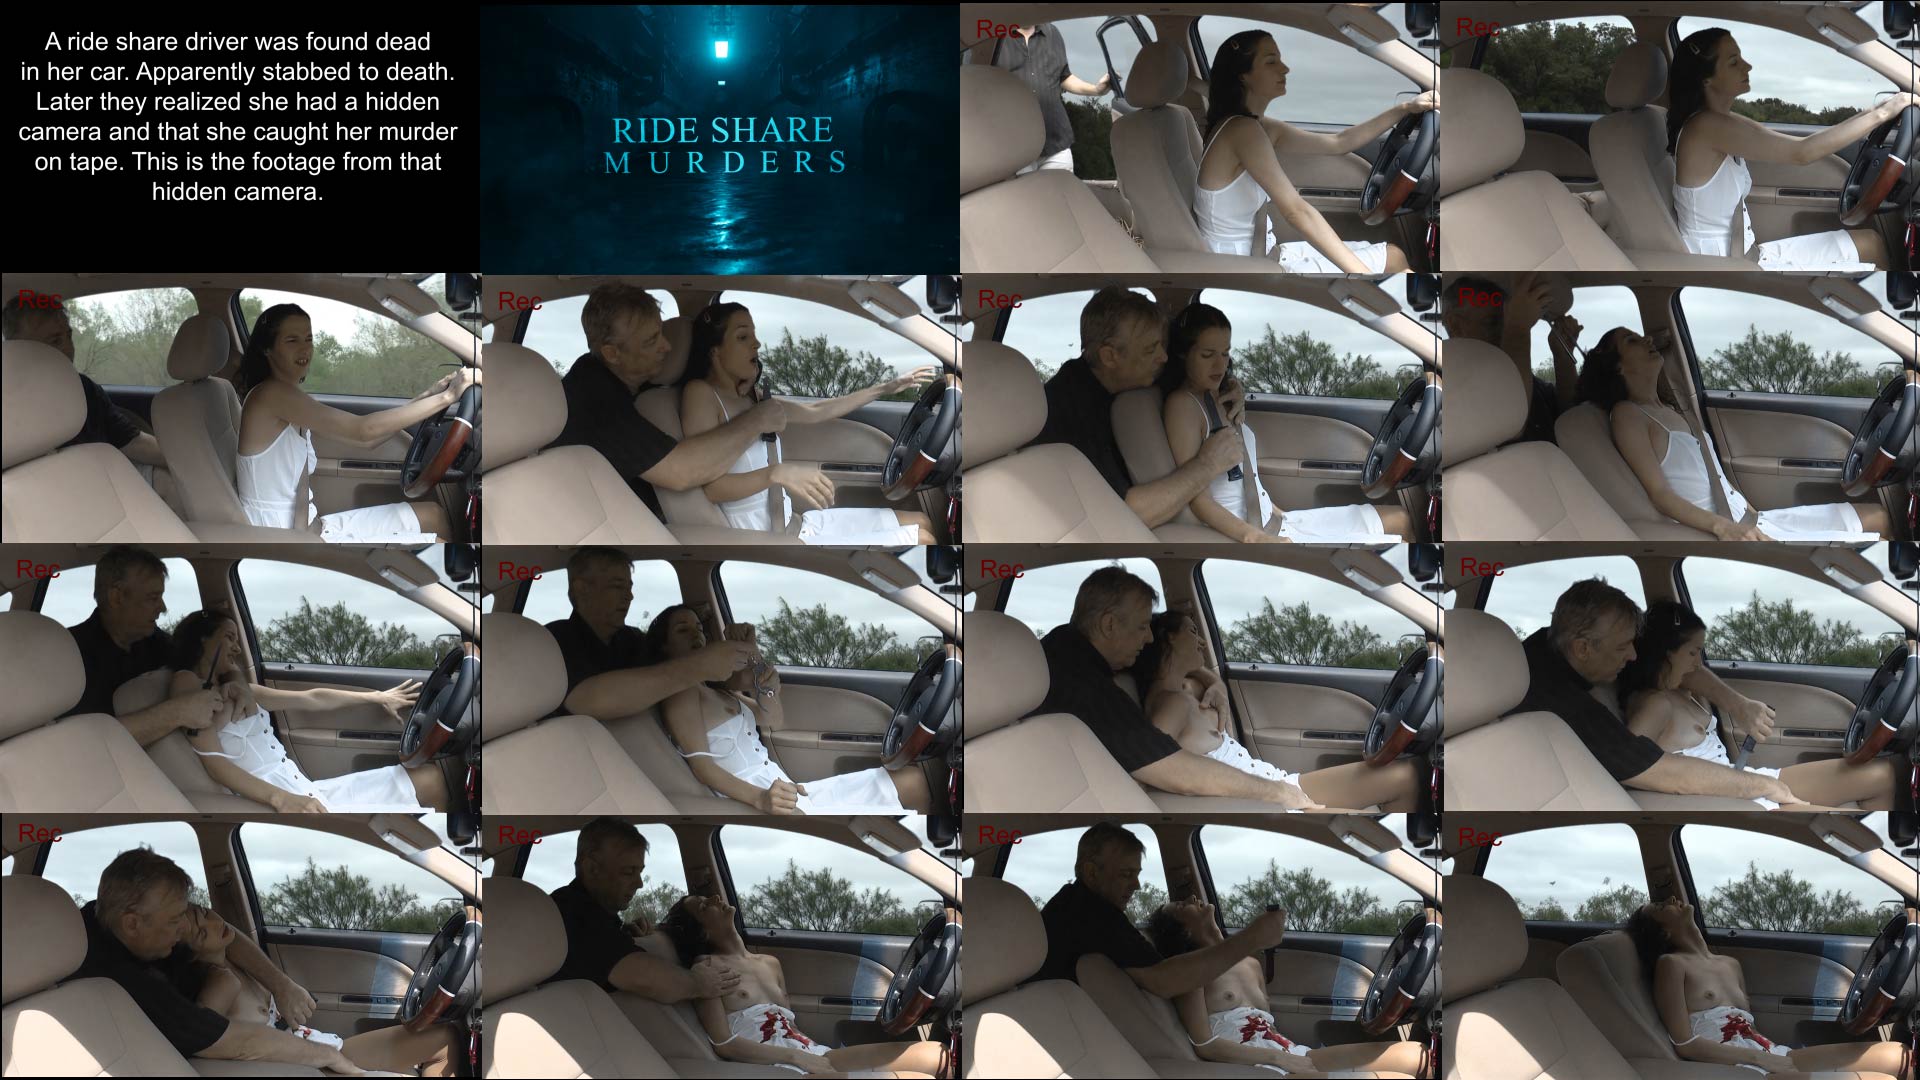 ride_share_murders_nicole_preview.jpg